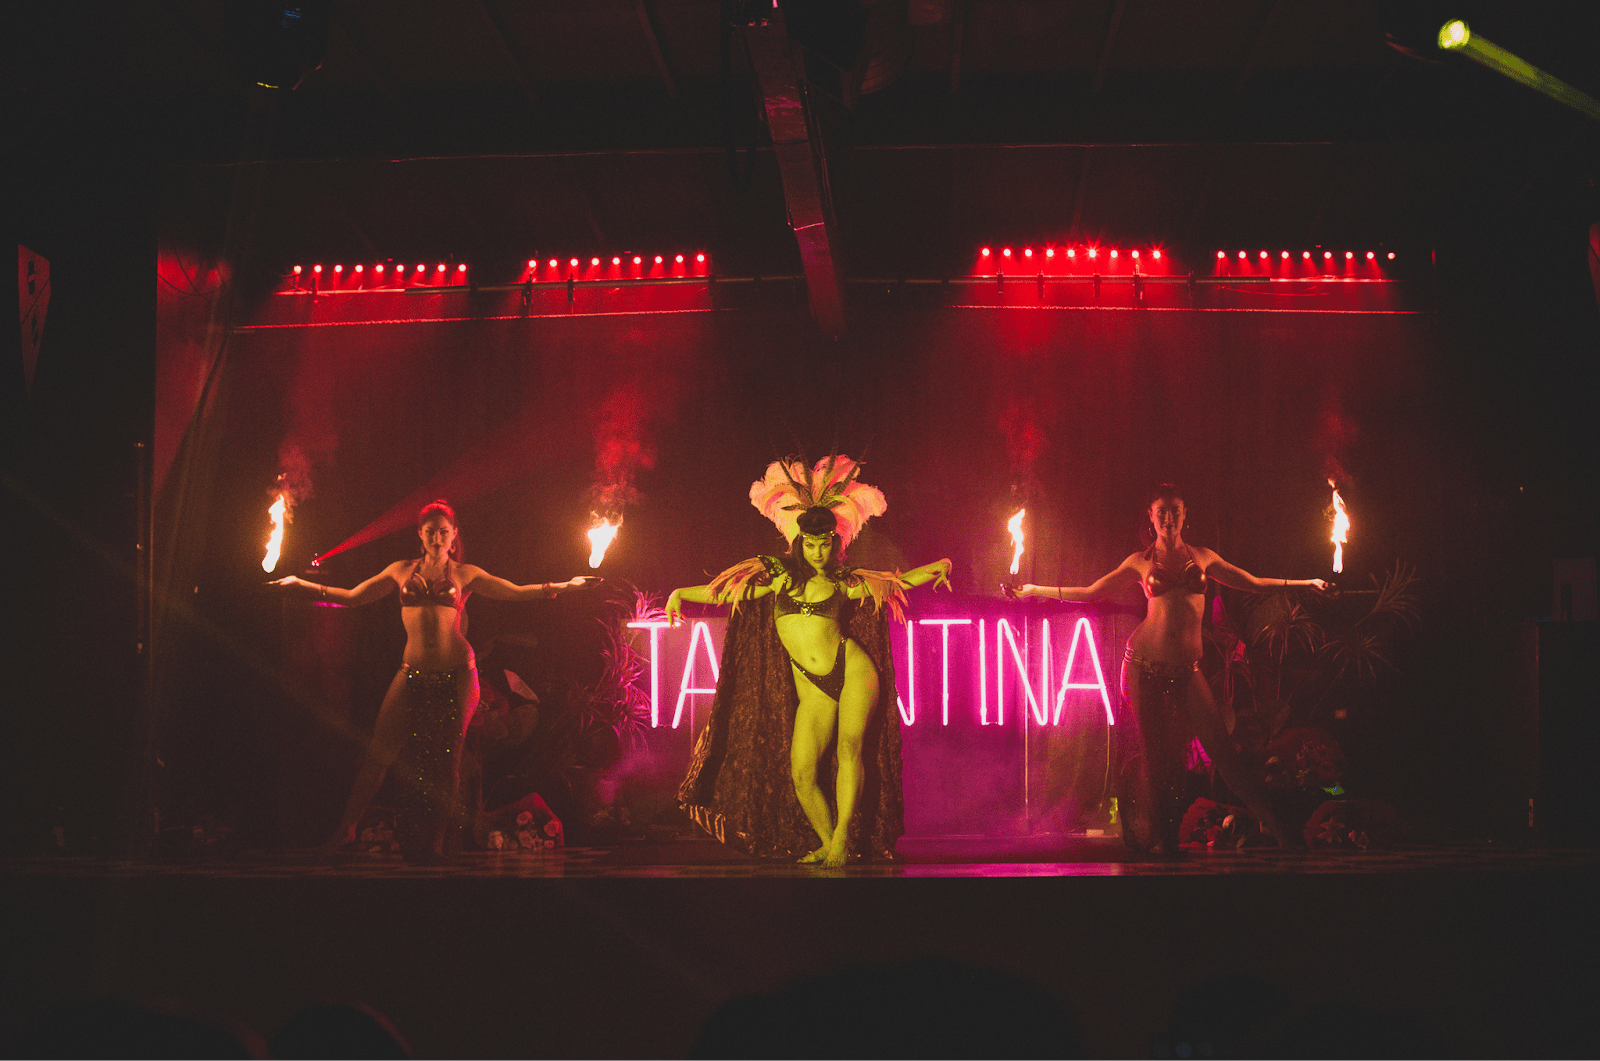 Burlesque performers dance during Tarantina show, one of the best things to do in Los Angeles